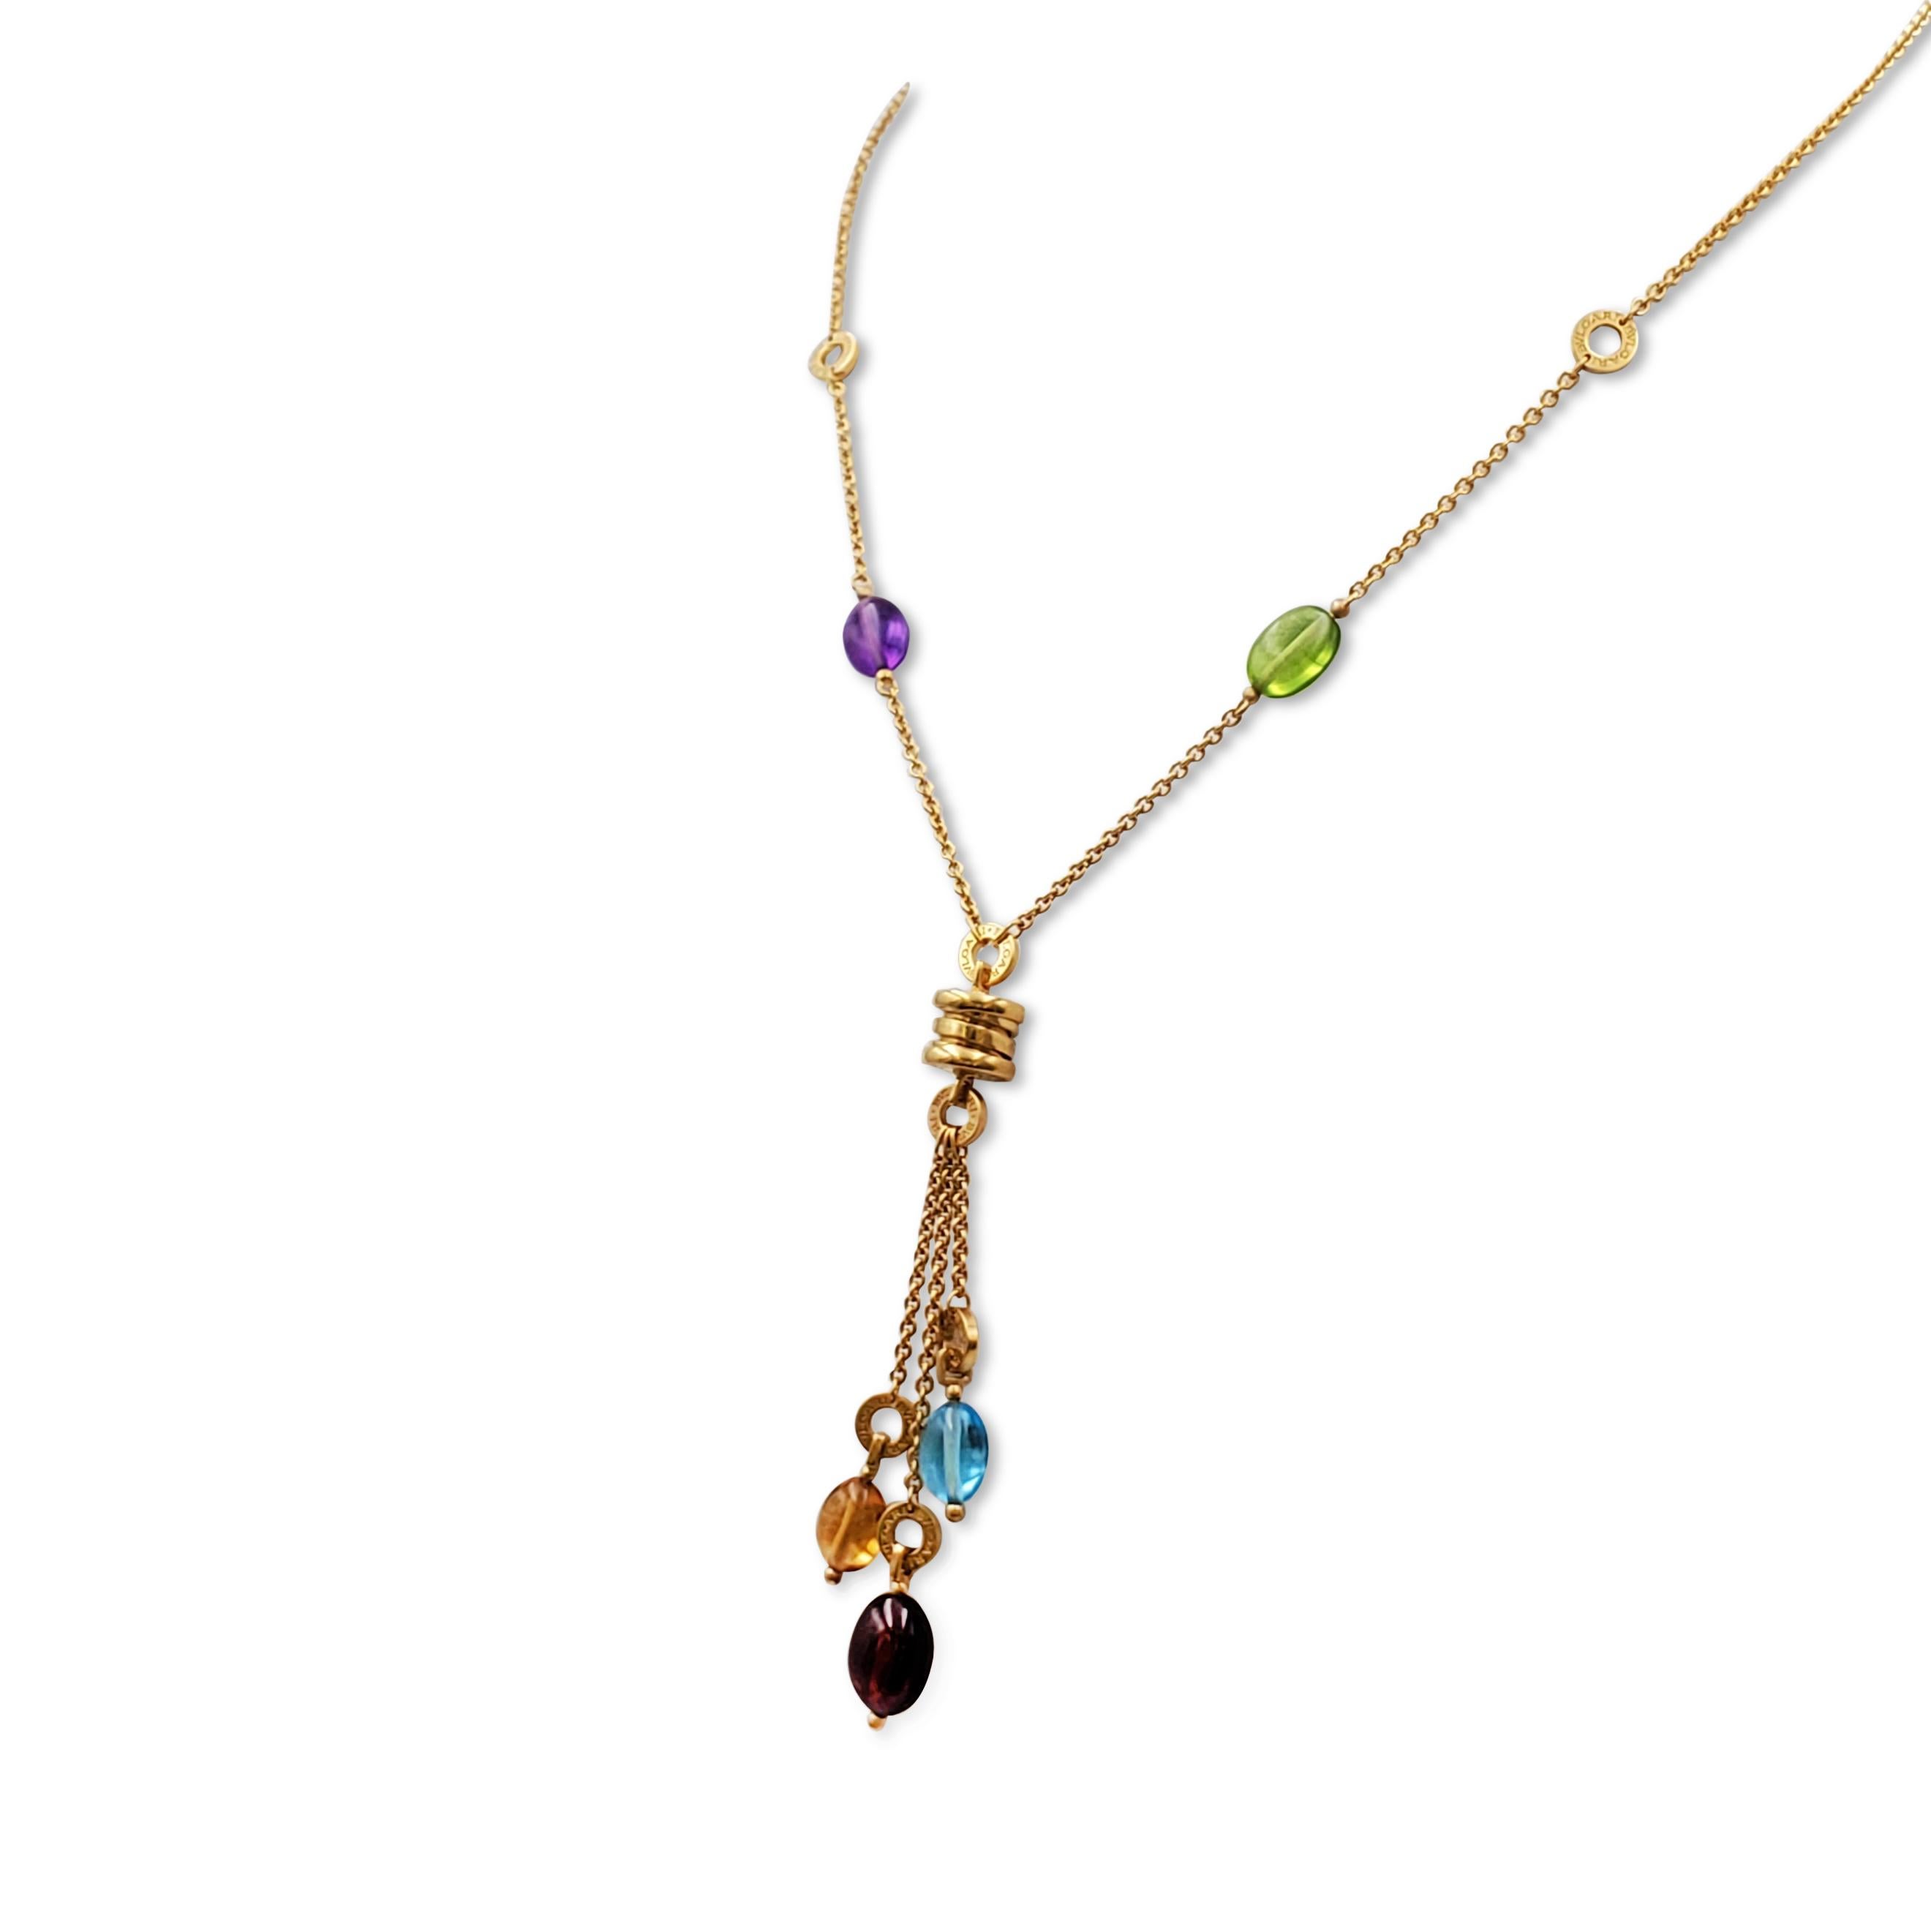 Authentic Bvlgari B.Zero necklace crafted in 18 karat yellow gold and featuring beads of Amethyst, Peridot, Blue Topaz, Garnet, and Citrine.  A 2 1/4 inch pendant is suspended from an adjustable 18 1/2 inch chain.  Signed Bvlgari, 750, Made in